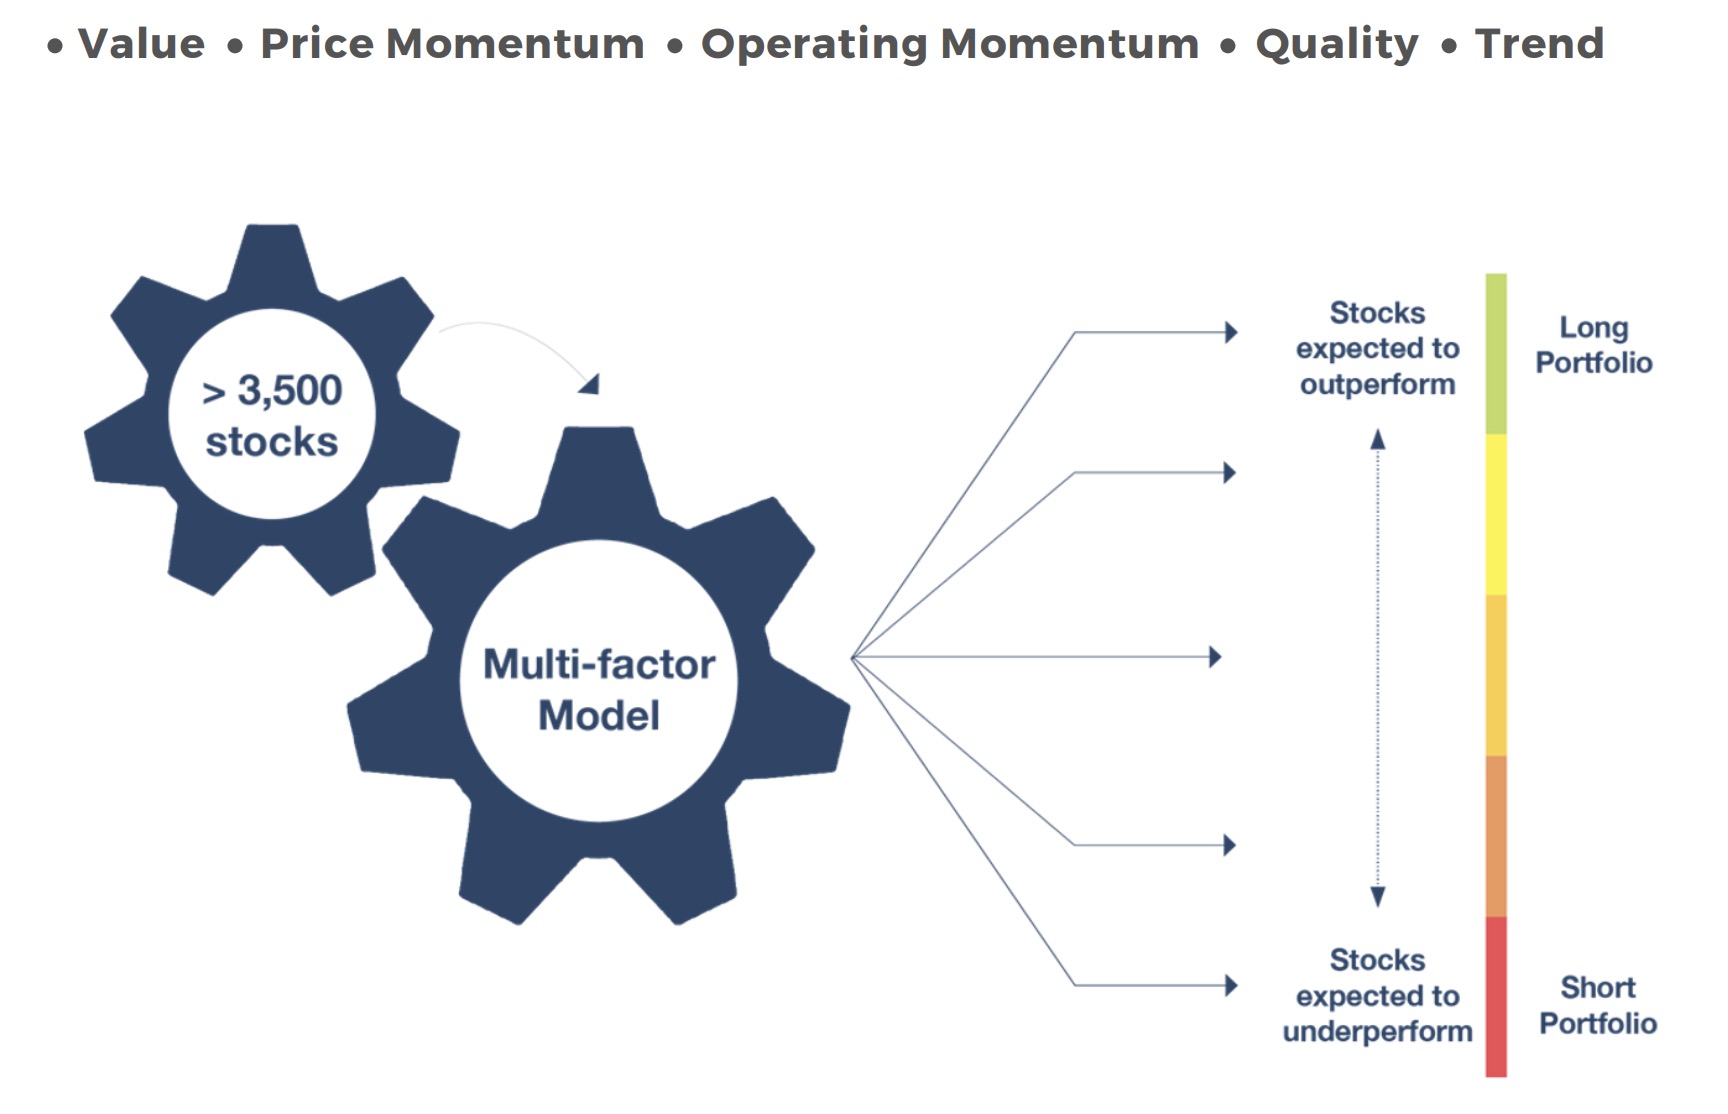 HDGE ETF Multi-Factor Model as a long-short equity strategy selecting stocks expected to outperform versus stocks expected to underperform using factors such as value, price momentum, operating momentum, quality and trend 